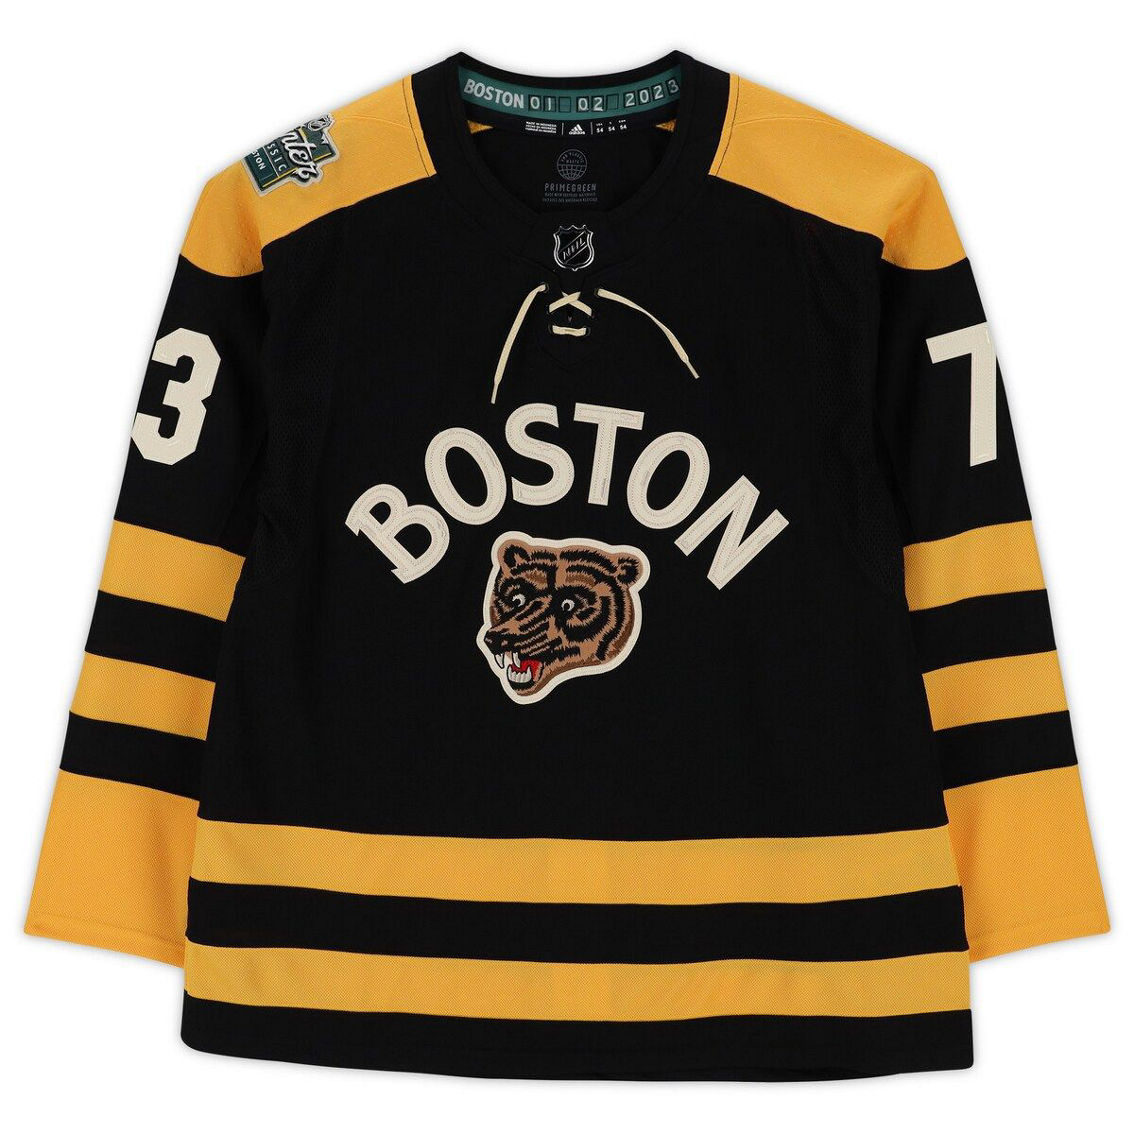 Fanatics Authentic Boston Bruins Autographed 2023 Winter Classic Adidas Authentic Jersey - Image 4 of 4